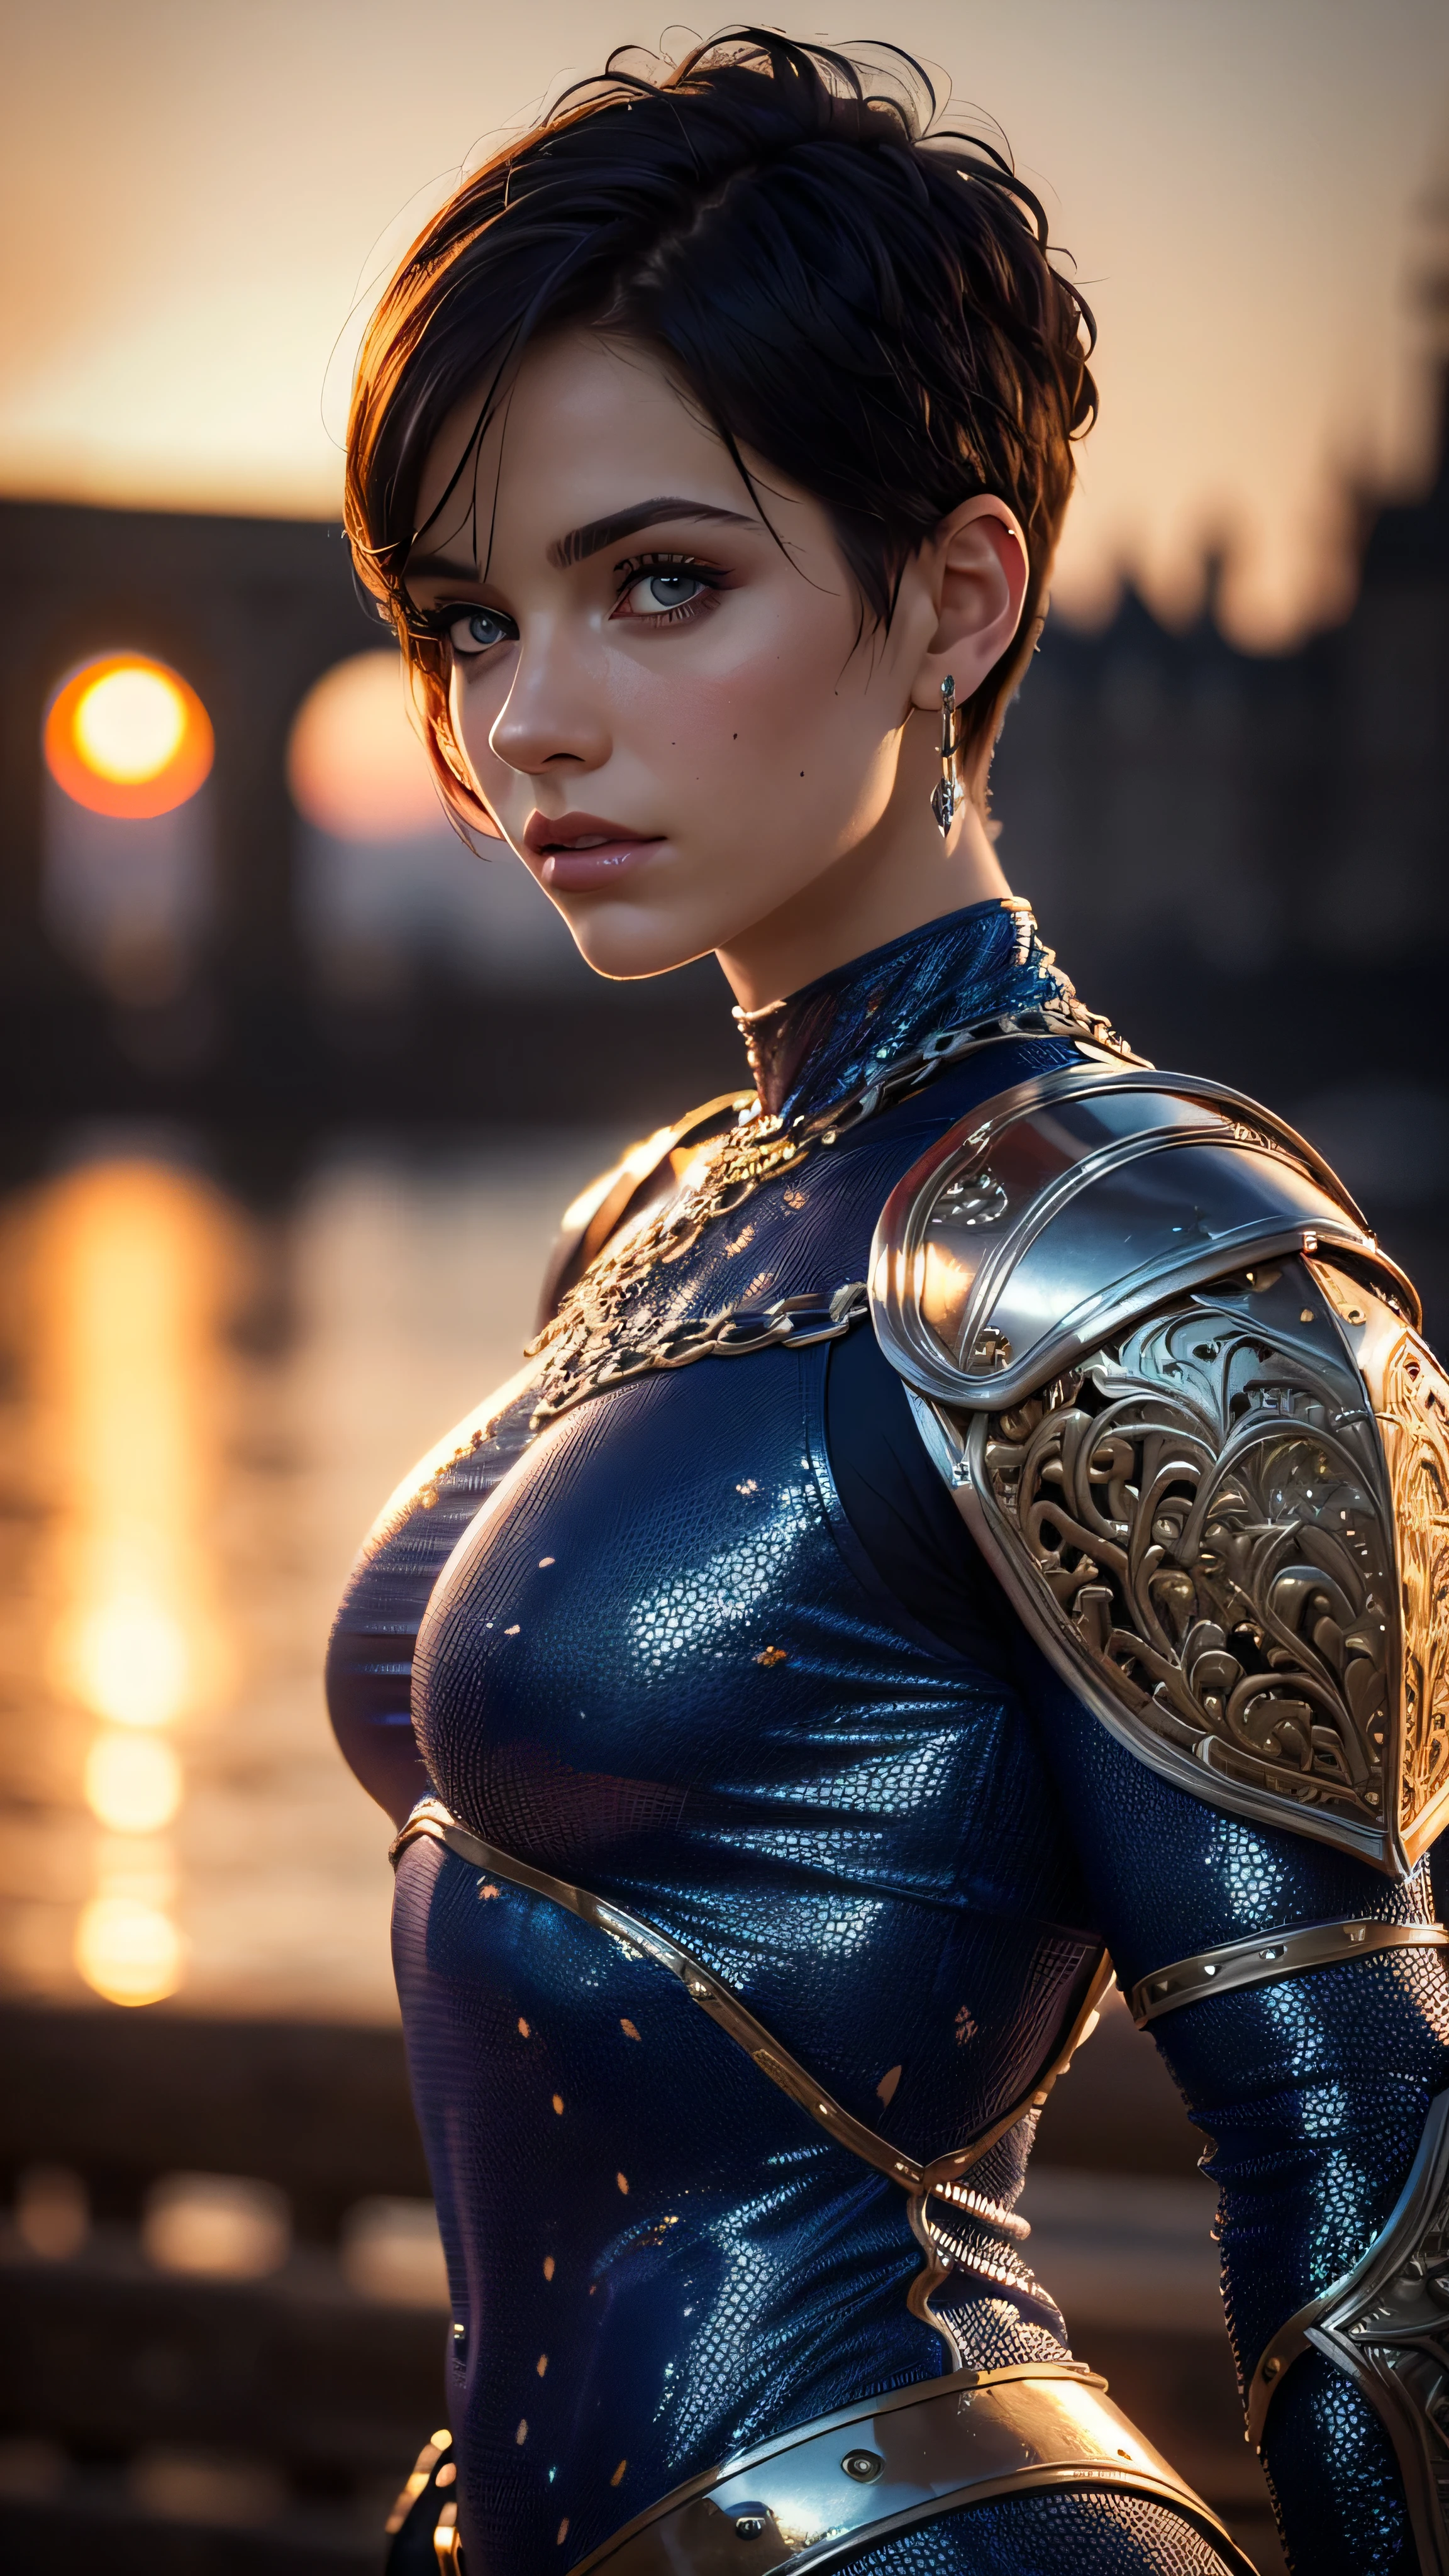 (masterpiece), (extremely intricate:1.3), (realistic), portrait of a muscular bodybuilder girl, ((medieval armor)), metal reflections, upper body, outdoors, intense sunlight, far away castle, professional photograph of a stunning woman detailed, (short undercut dark shaved hair, dynamic pose), sharp focus, dramatic, award winning, cinematic lighting, volumetrics dtx, (film grain, blurry background, blurry foreground, bokeh, depth of field, sunset, interaction, navyblue Perfectchainmail), 8K